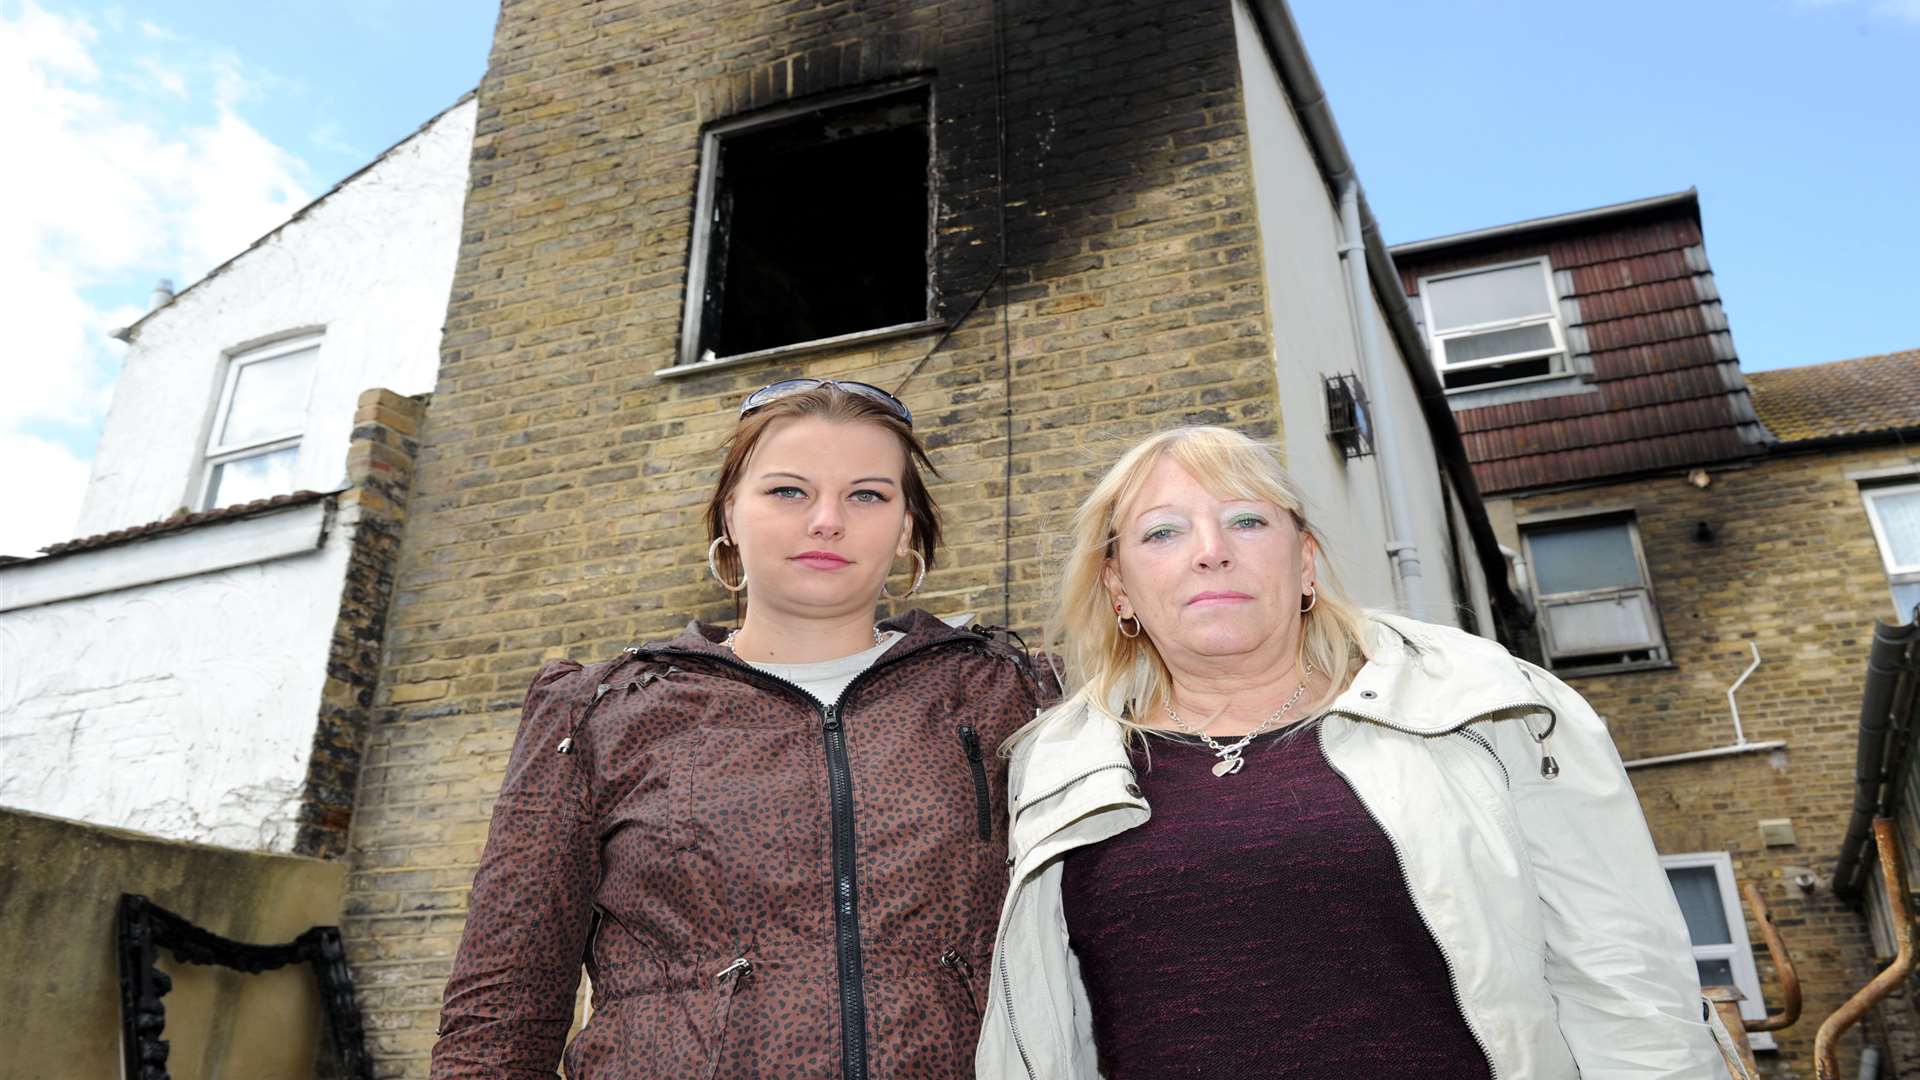 Sandra Lawson with her daughter Adele at John's Lawson's flat - which was badly damaged in a fire